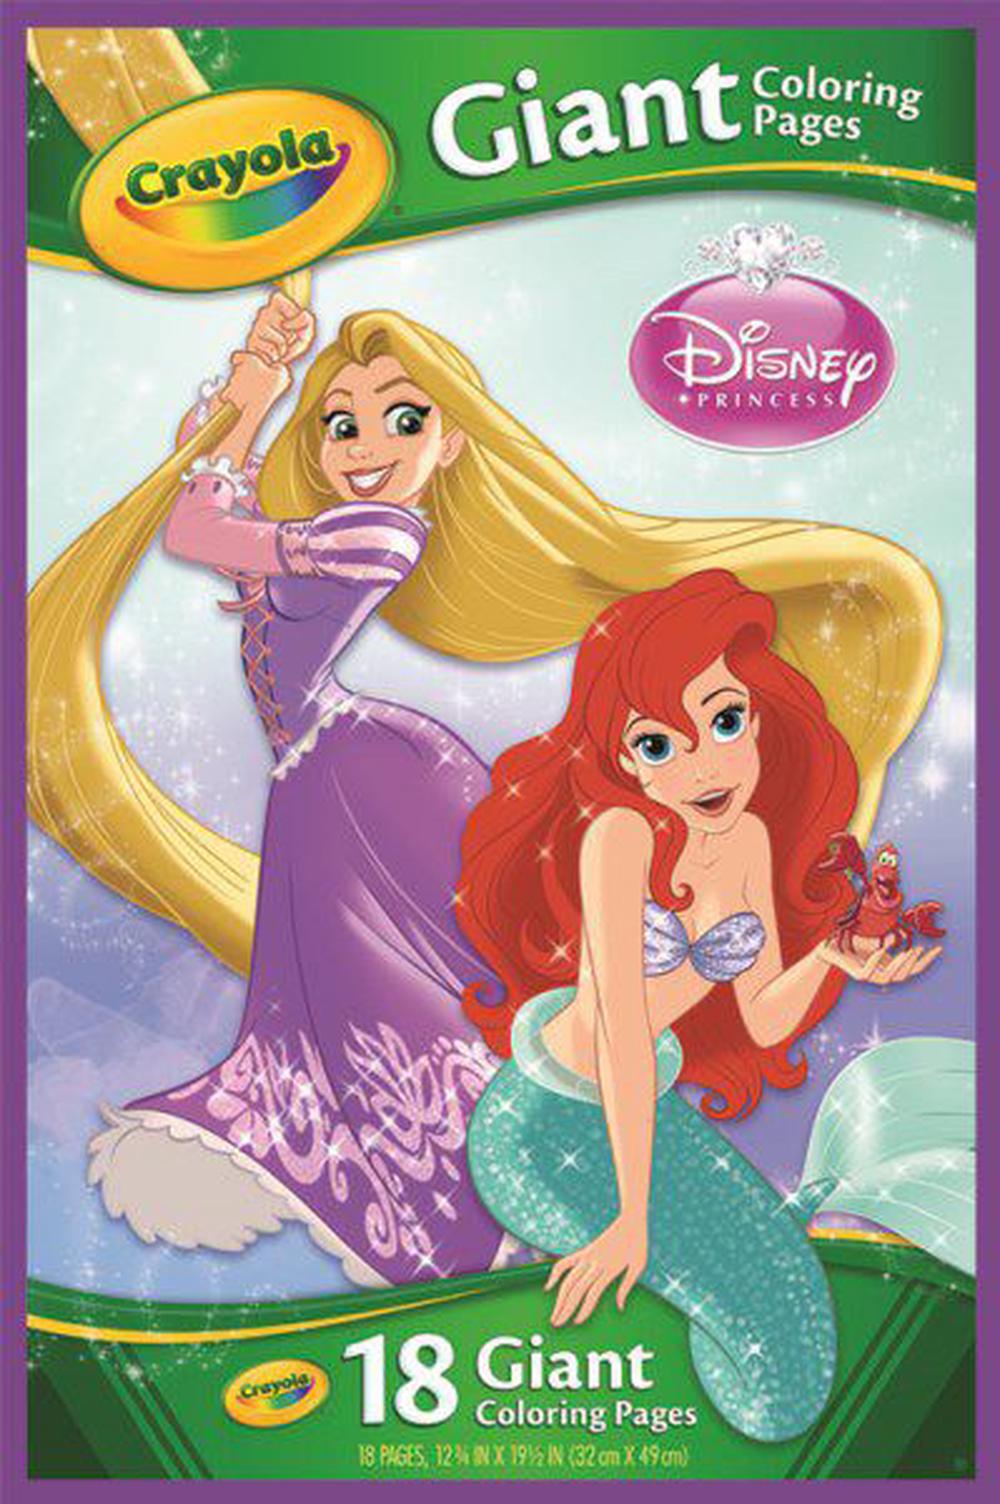 4600 Top Crayola Giant Coloring Pages Disney Princess Images & Pictures In HD